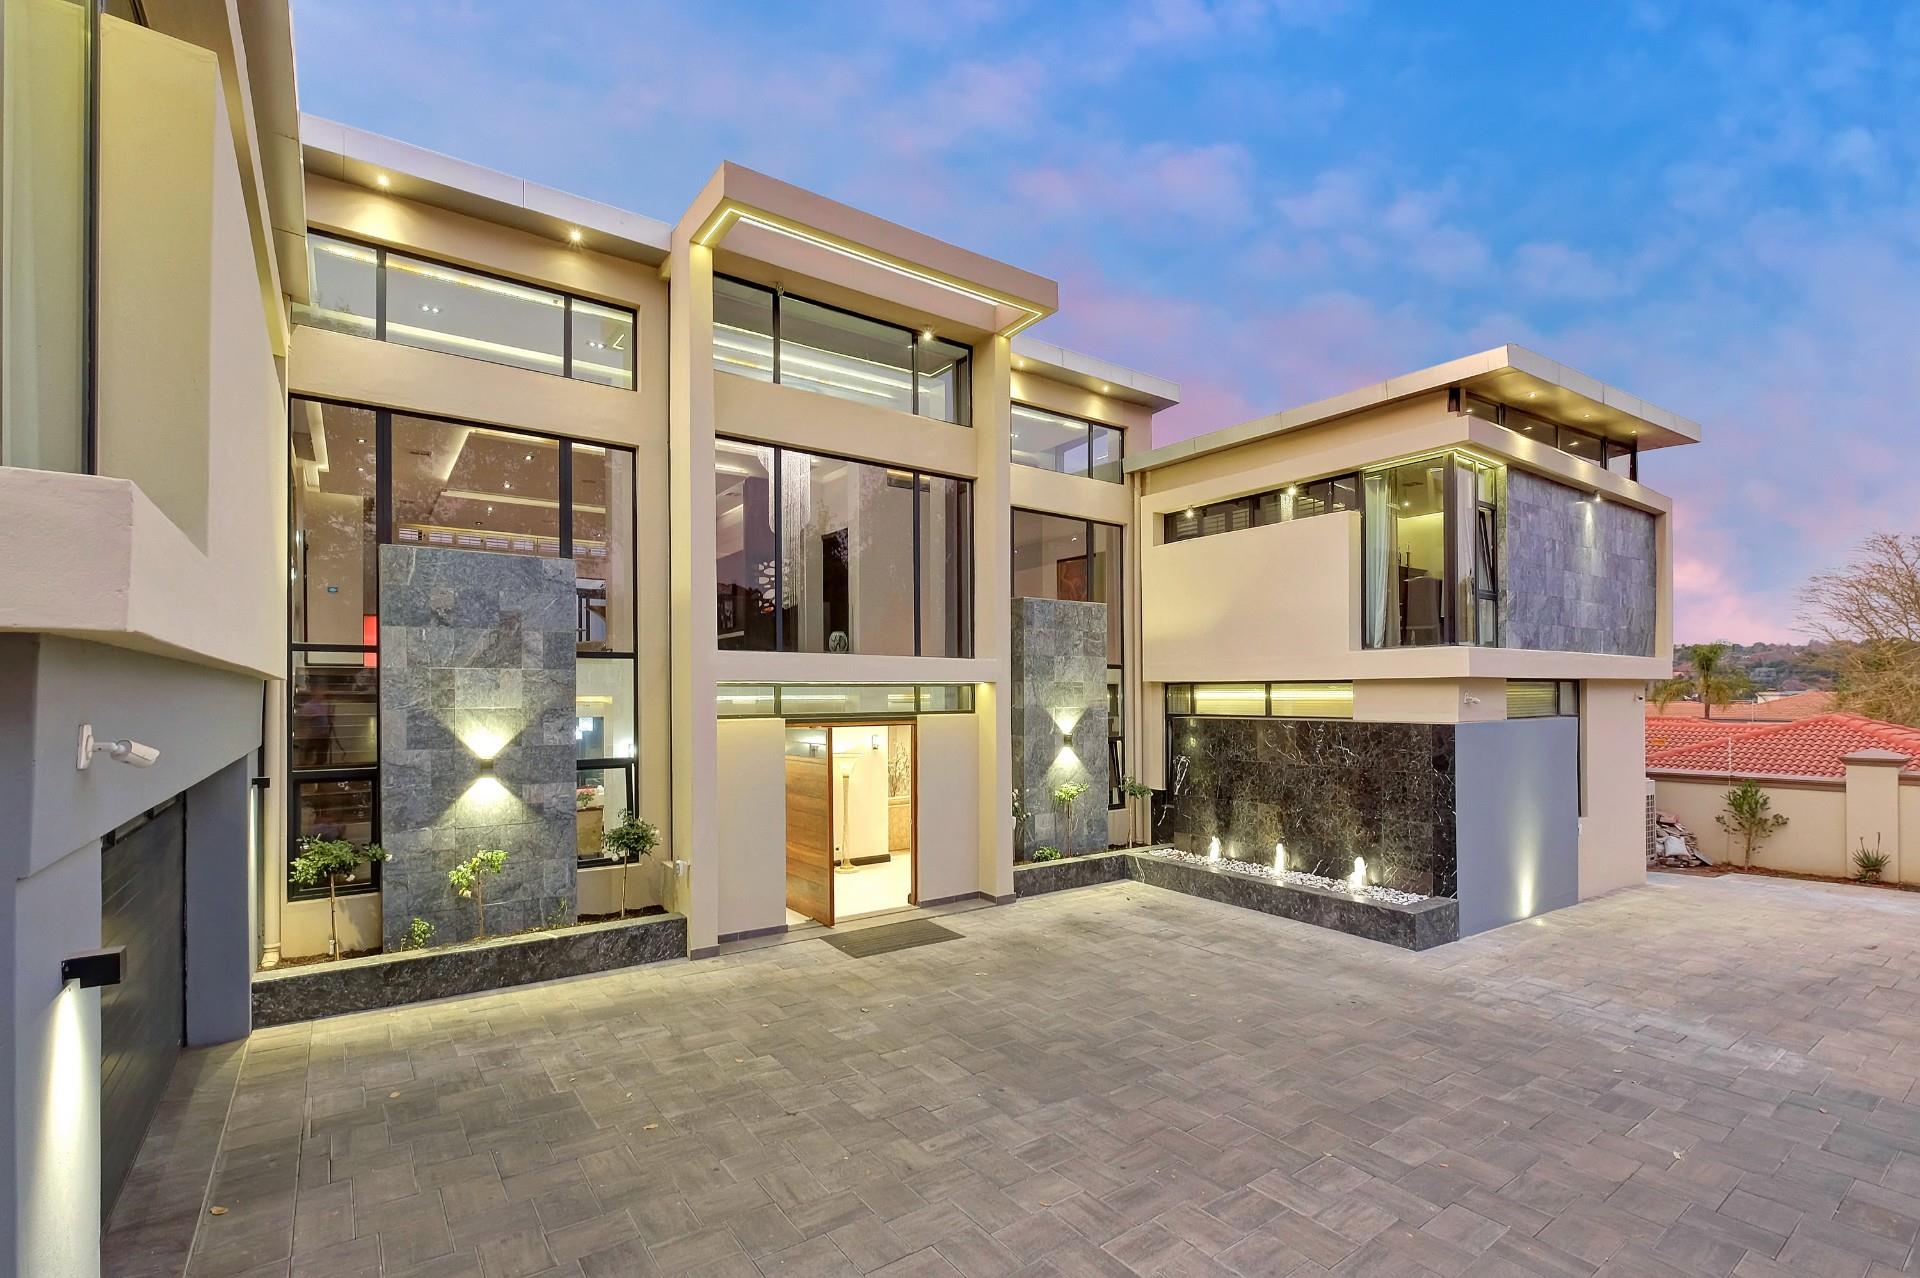 6 Bedroom House for Sale in Morningside | Sandton - South Africa | IA0002070375 | www.paulmartinsmith.com